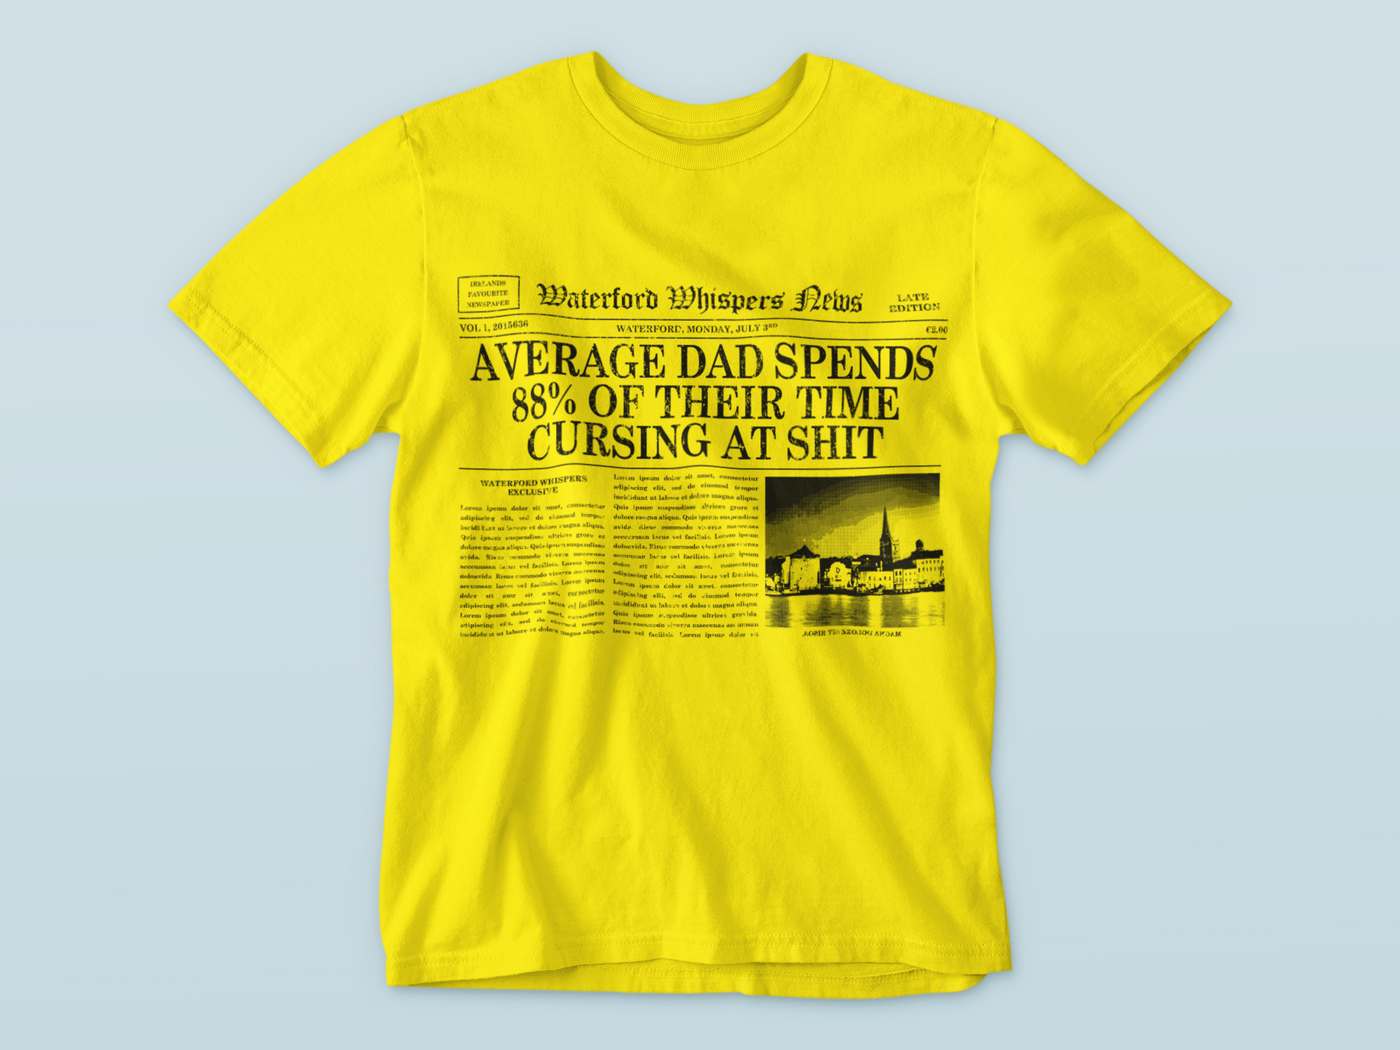 Average Dad Spends 88% Of Their Time Cursing At Shit - Waterford Whispers T-Shirt